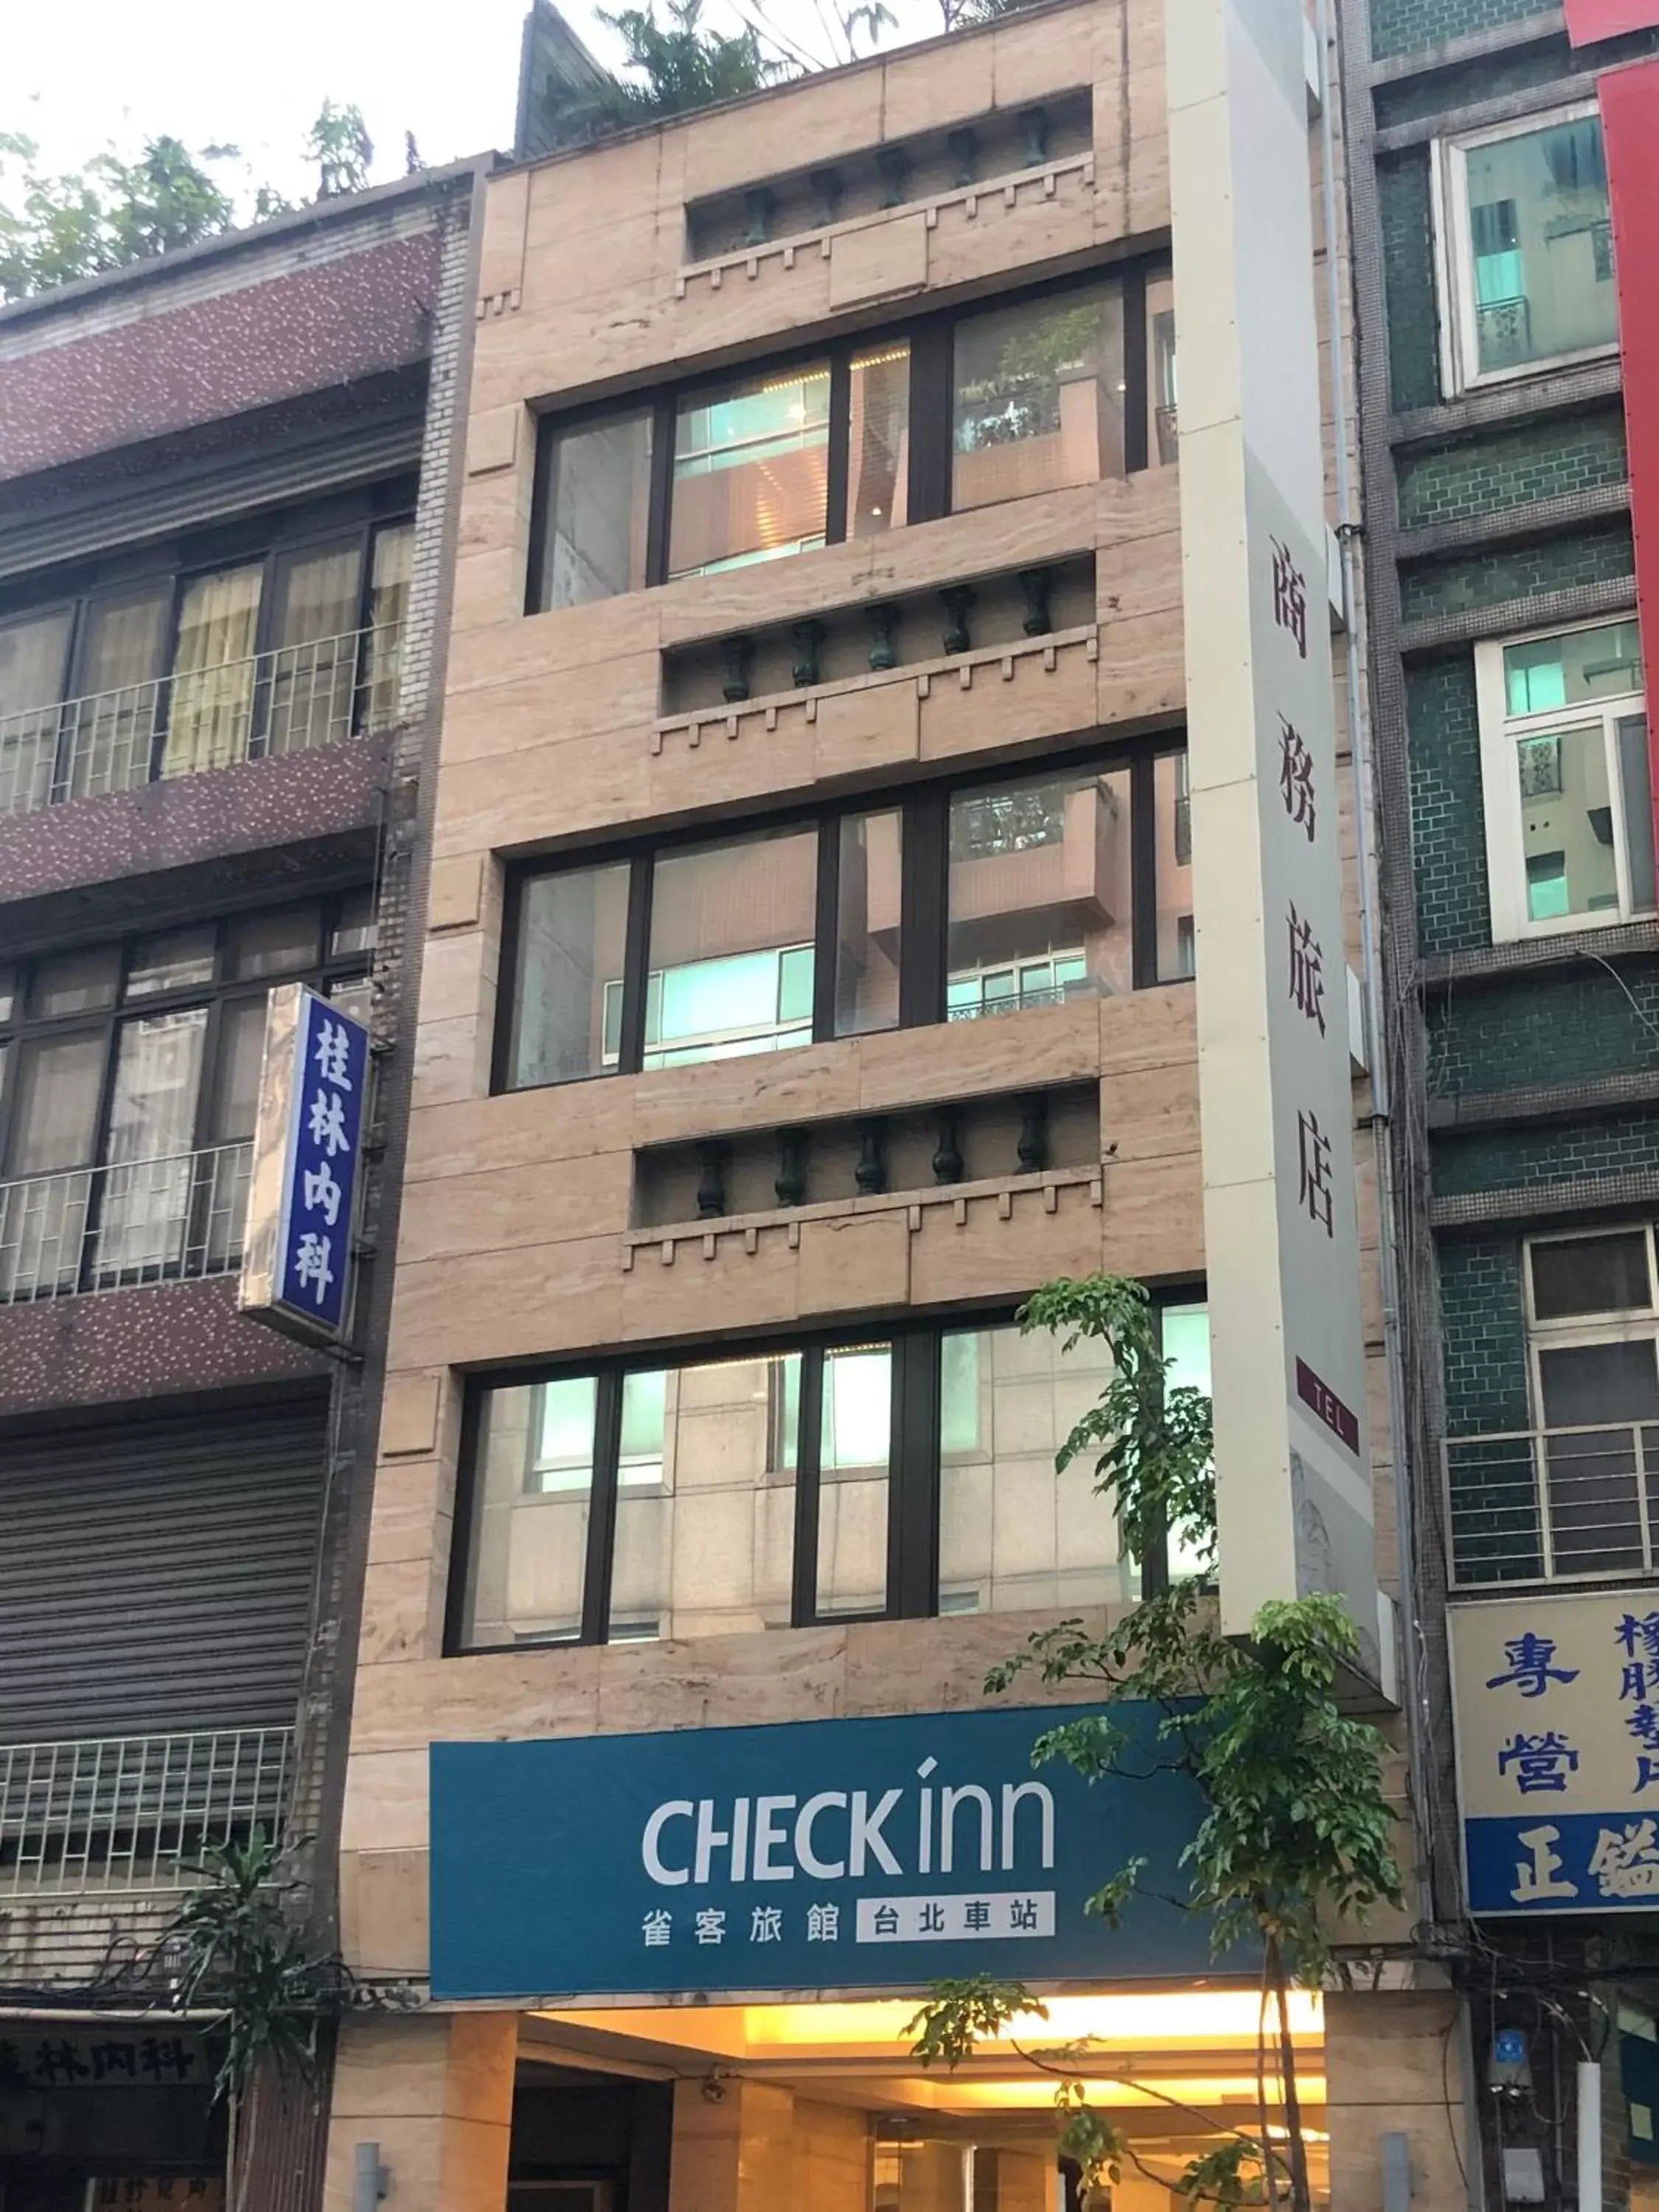 Property Building in CHECK inn Express Taipei Station